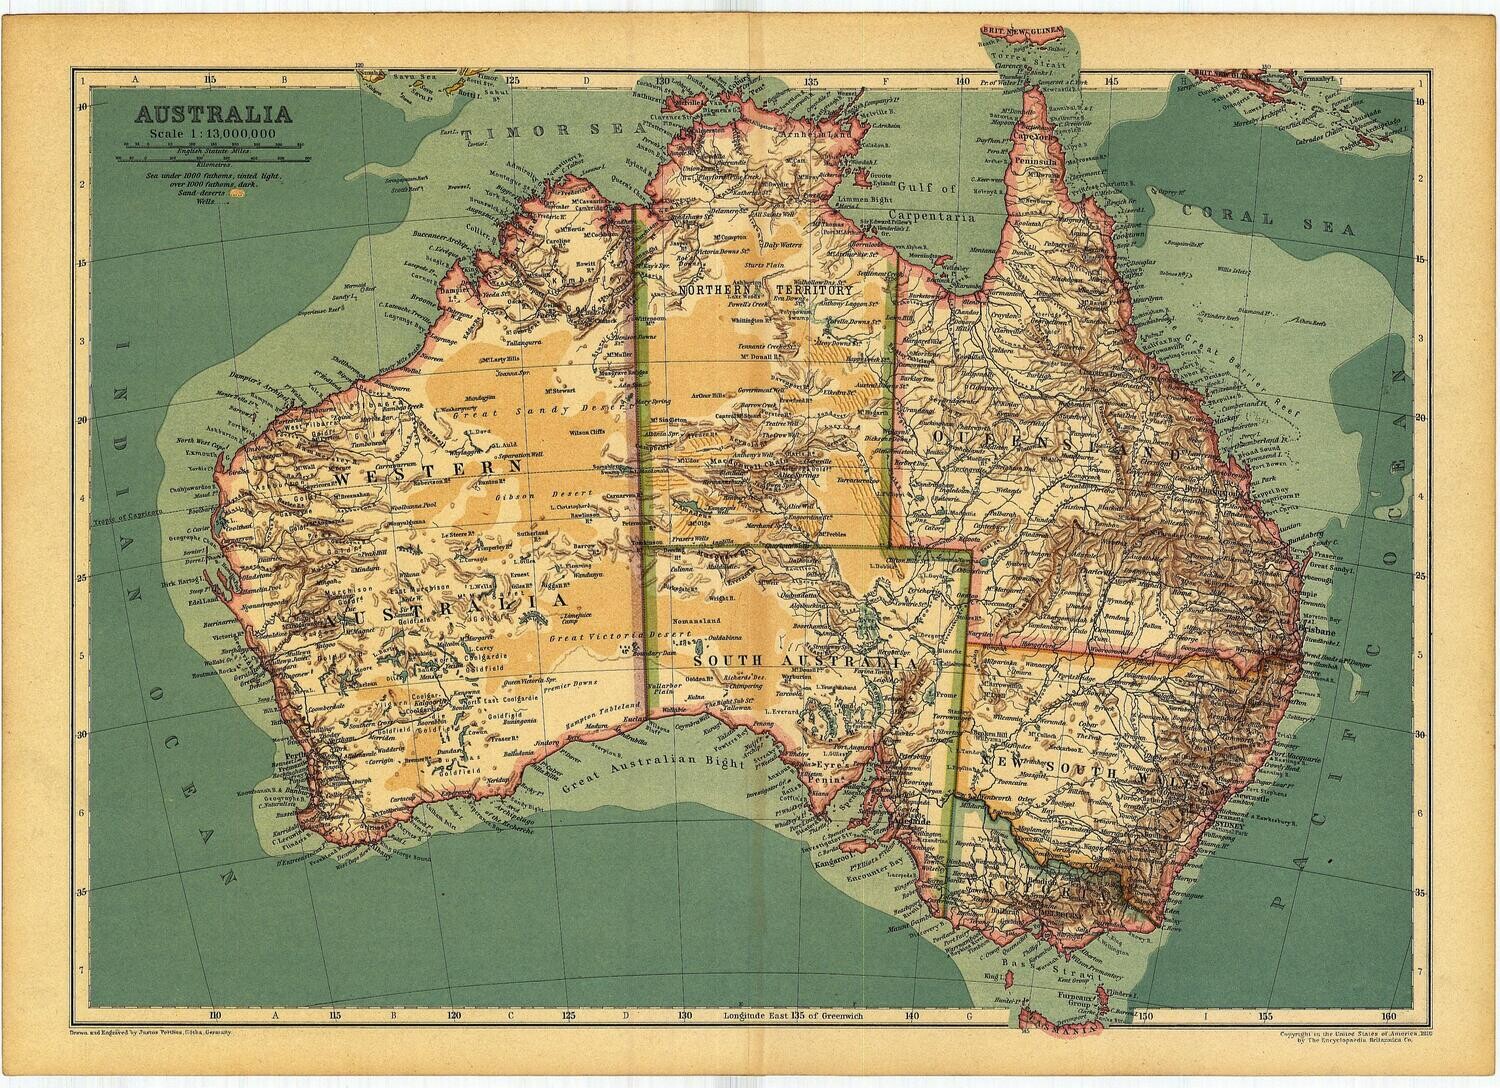 1910 Map of Australia by Justus Perthus in Chromolithography